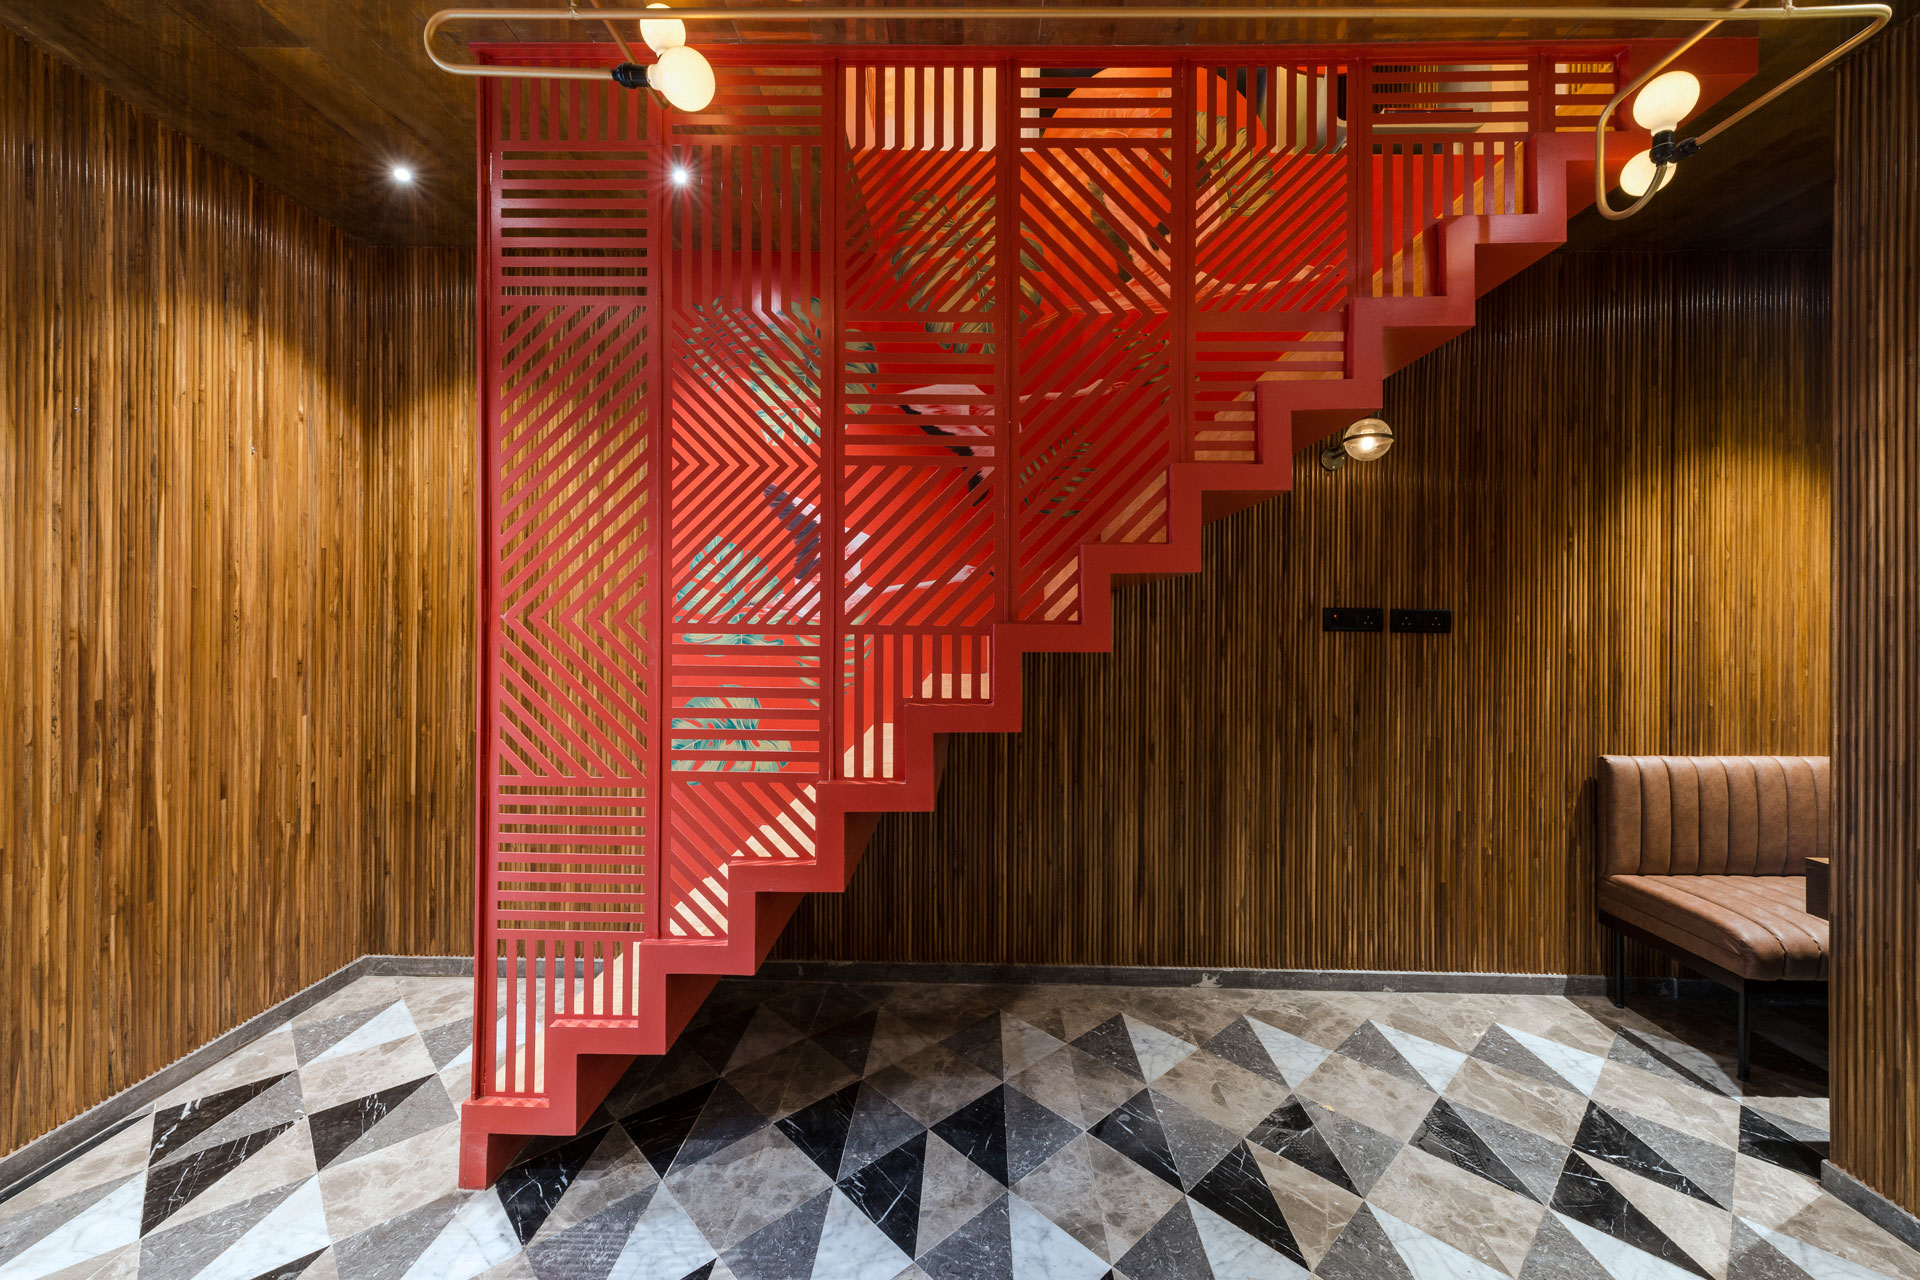 The staircase, leading to the upper level, is treated as a red box insert which has hand-painted flying up the stairs flamingos on one side and a cutwork metal screen on the other.